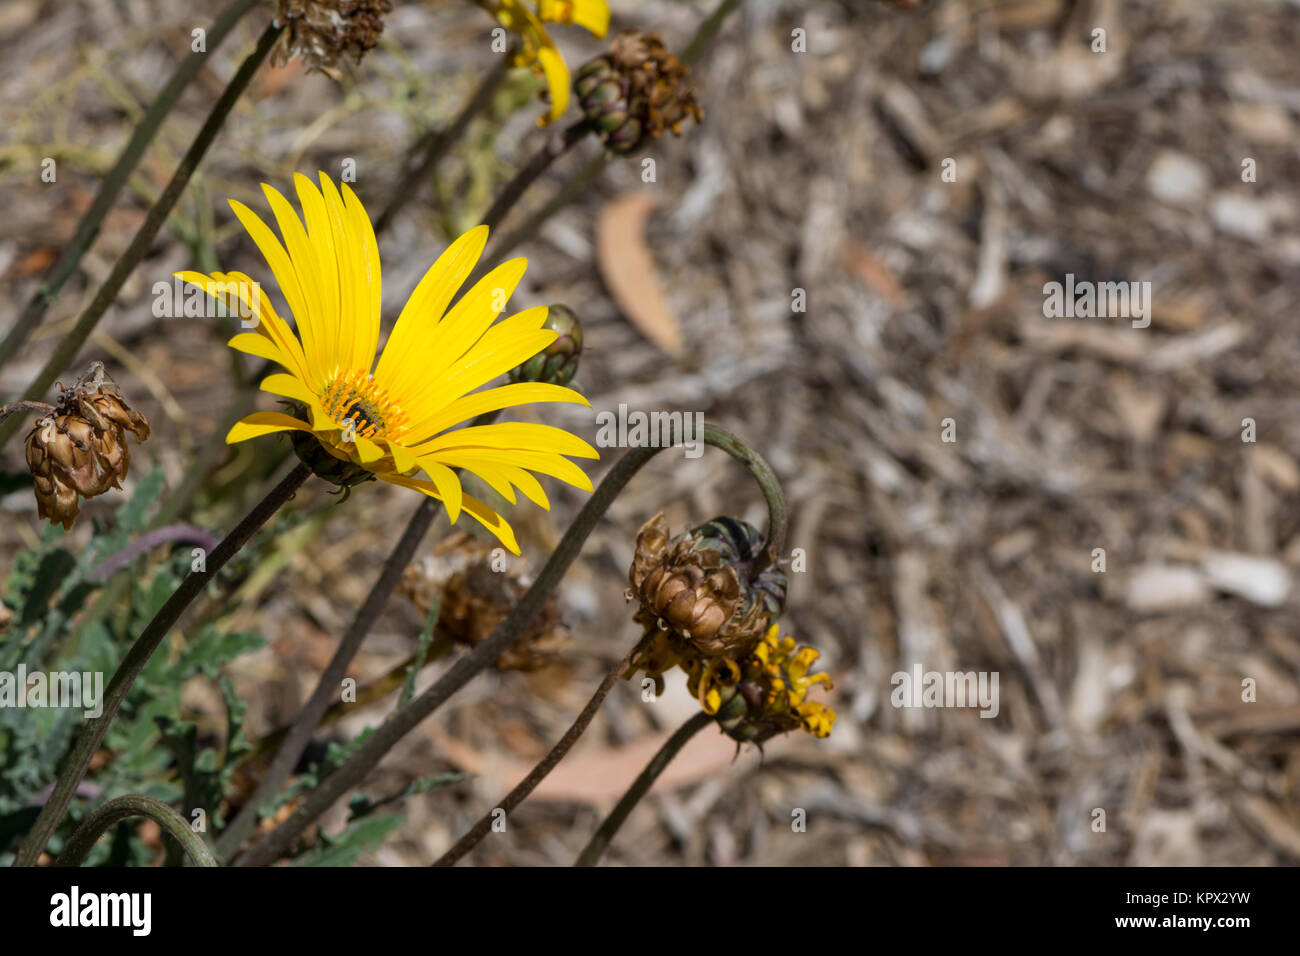 A single yellow Blooming Arctotis flower head in the garden bed with a variety of spent, old and shrivelled Arctotis flower heads Stock Photo